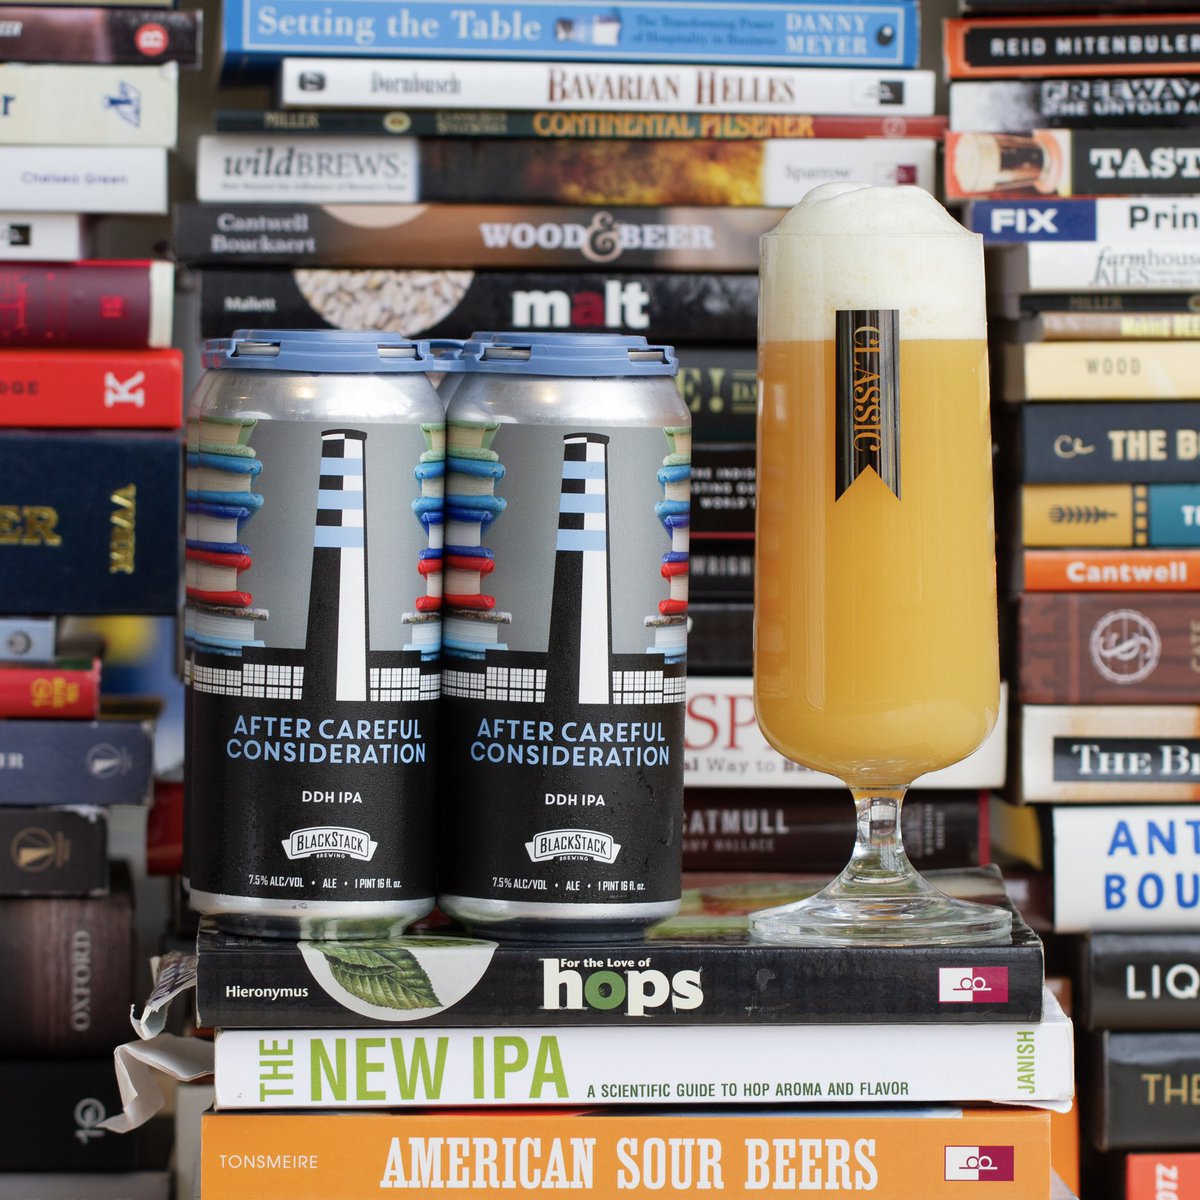 📘📗📕AFTER CAREFUL CONSIDERATION📕📗📘 DDH IPA (7.5%) Things happen fast around these parts. Sometimes you get time to ponder on it. Sometimes you just gotta go for it. Thoughtful additions of Azacca Cryo, Citra, Cashmere, Idaho 7 & NZ Motueka. Just do what feels right.